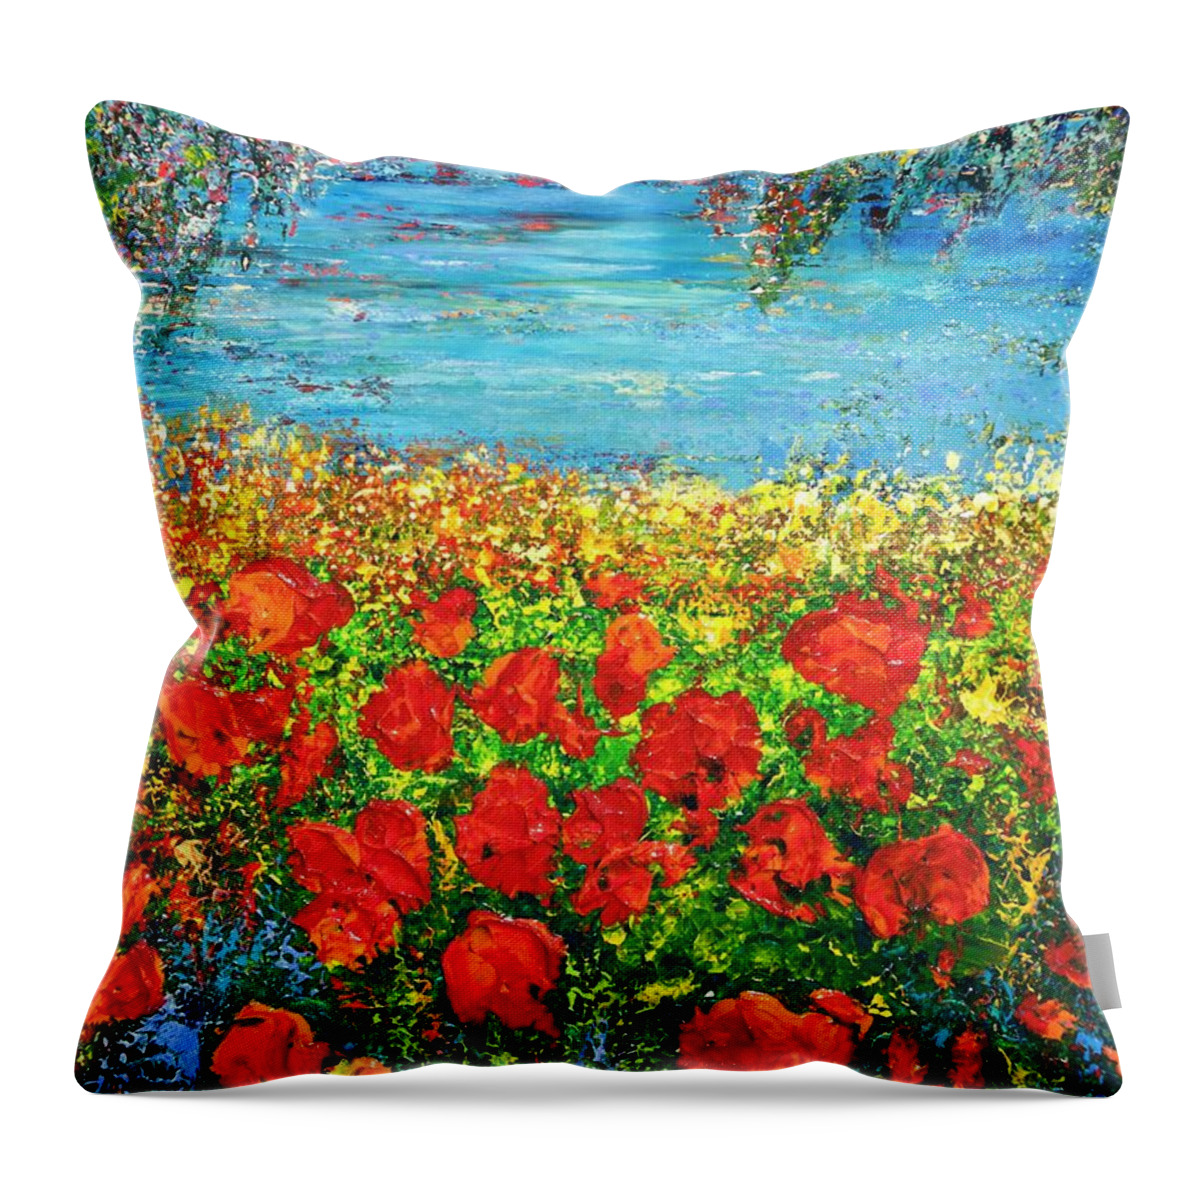 Floral Abstract Throw Pillow featuring the painting Silence by Teresa Wegrzyn